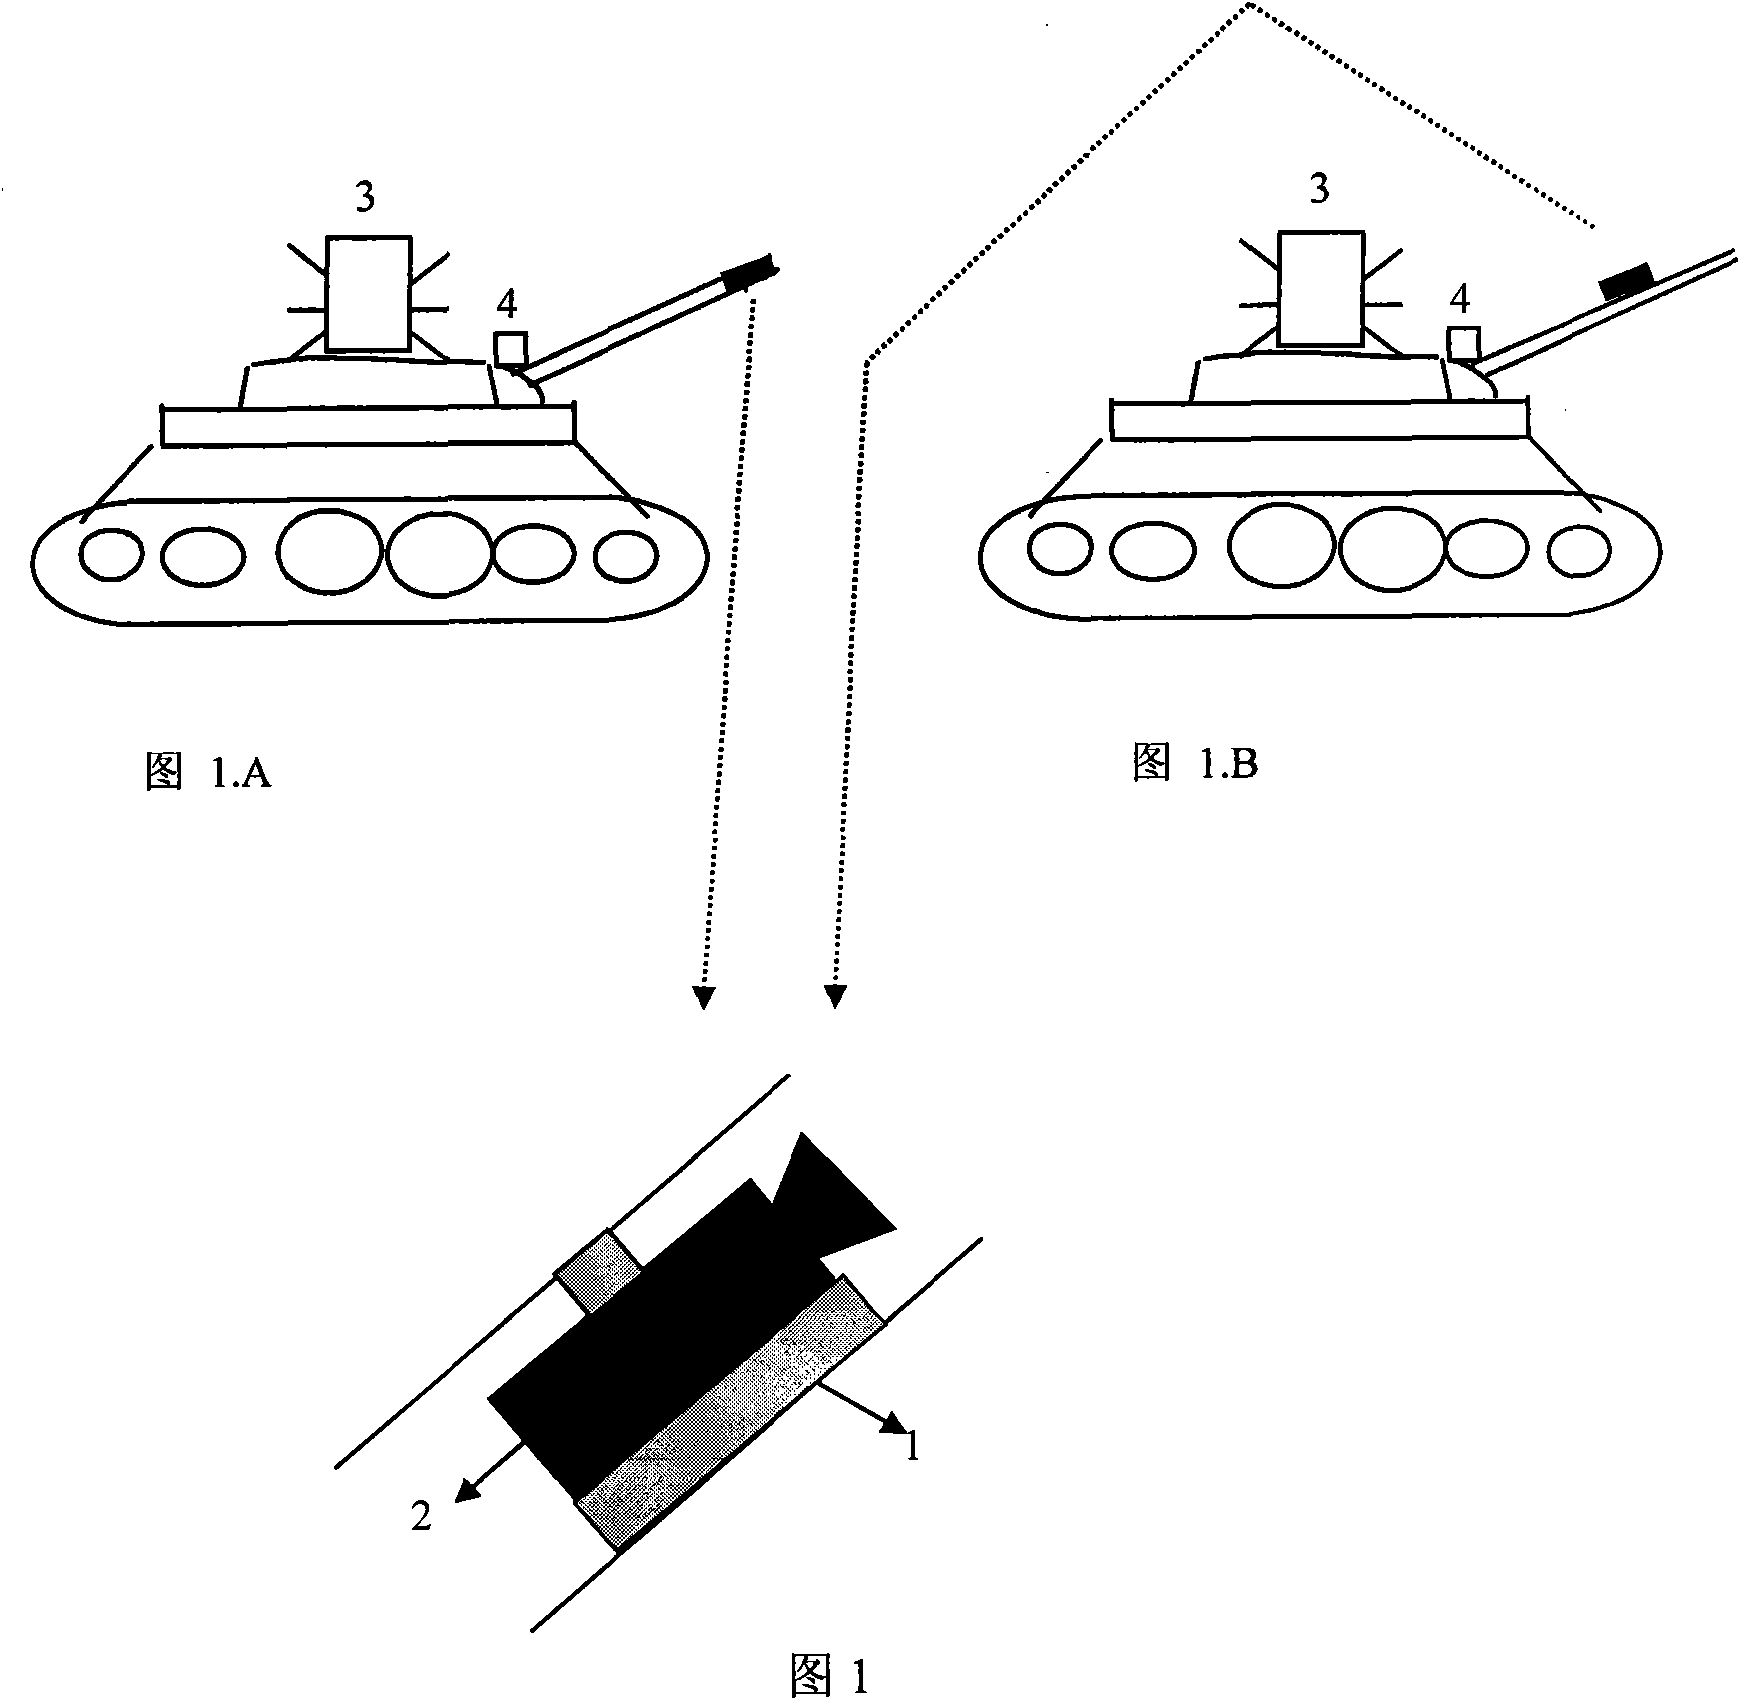 Method for judging targeting of simulated shooting for tank element training based on image analysis